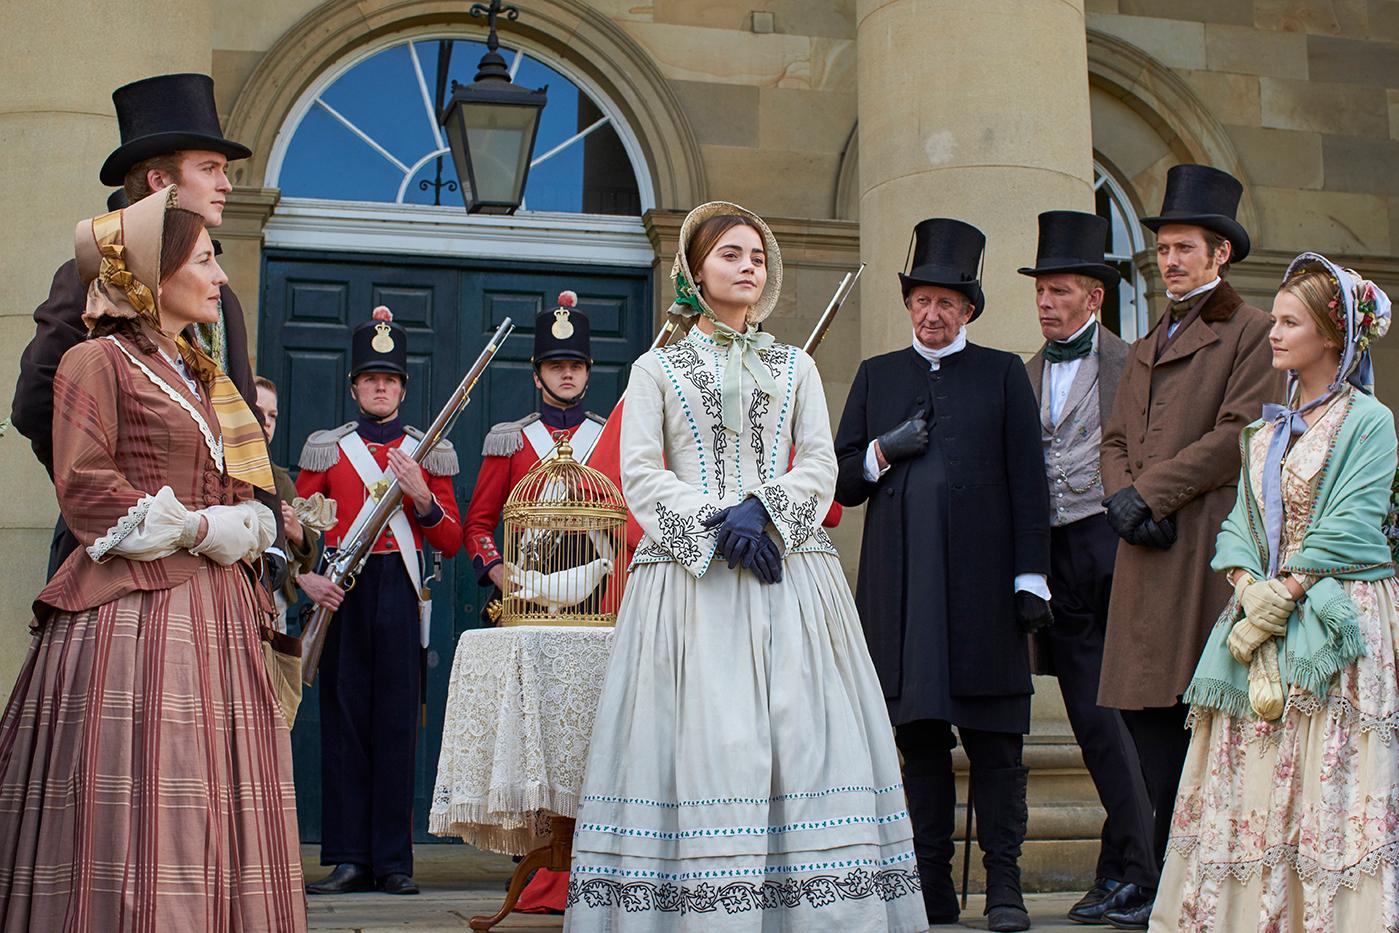 Jenna Coleman as Victoria in Dublin. Photo: Justin Slee/ITV Plc for MASTERPIECE